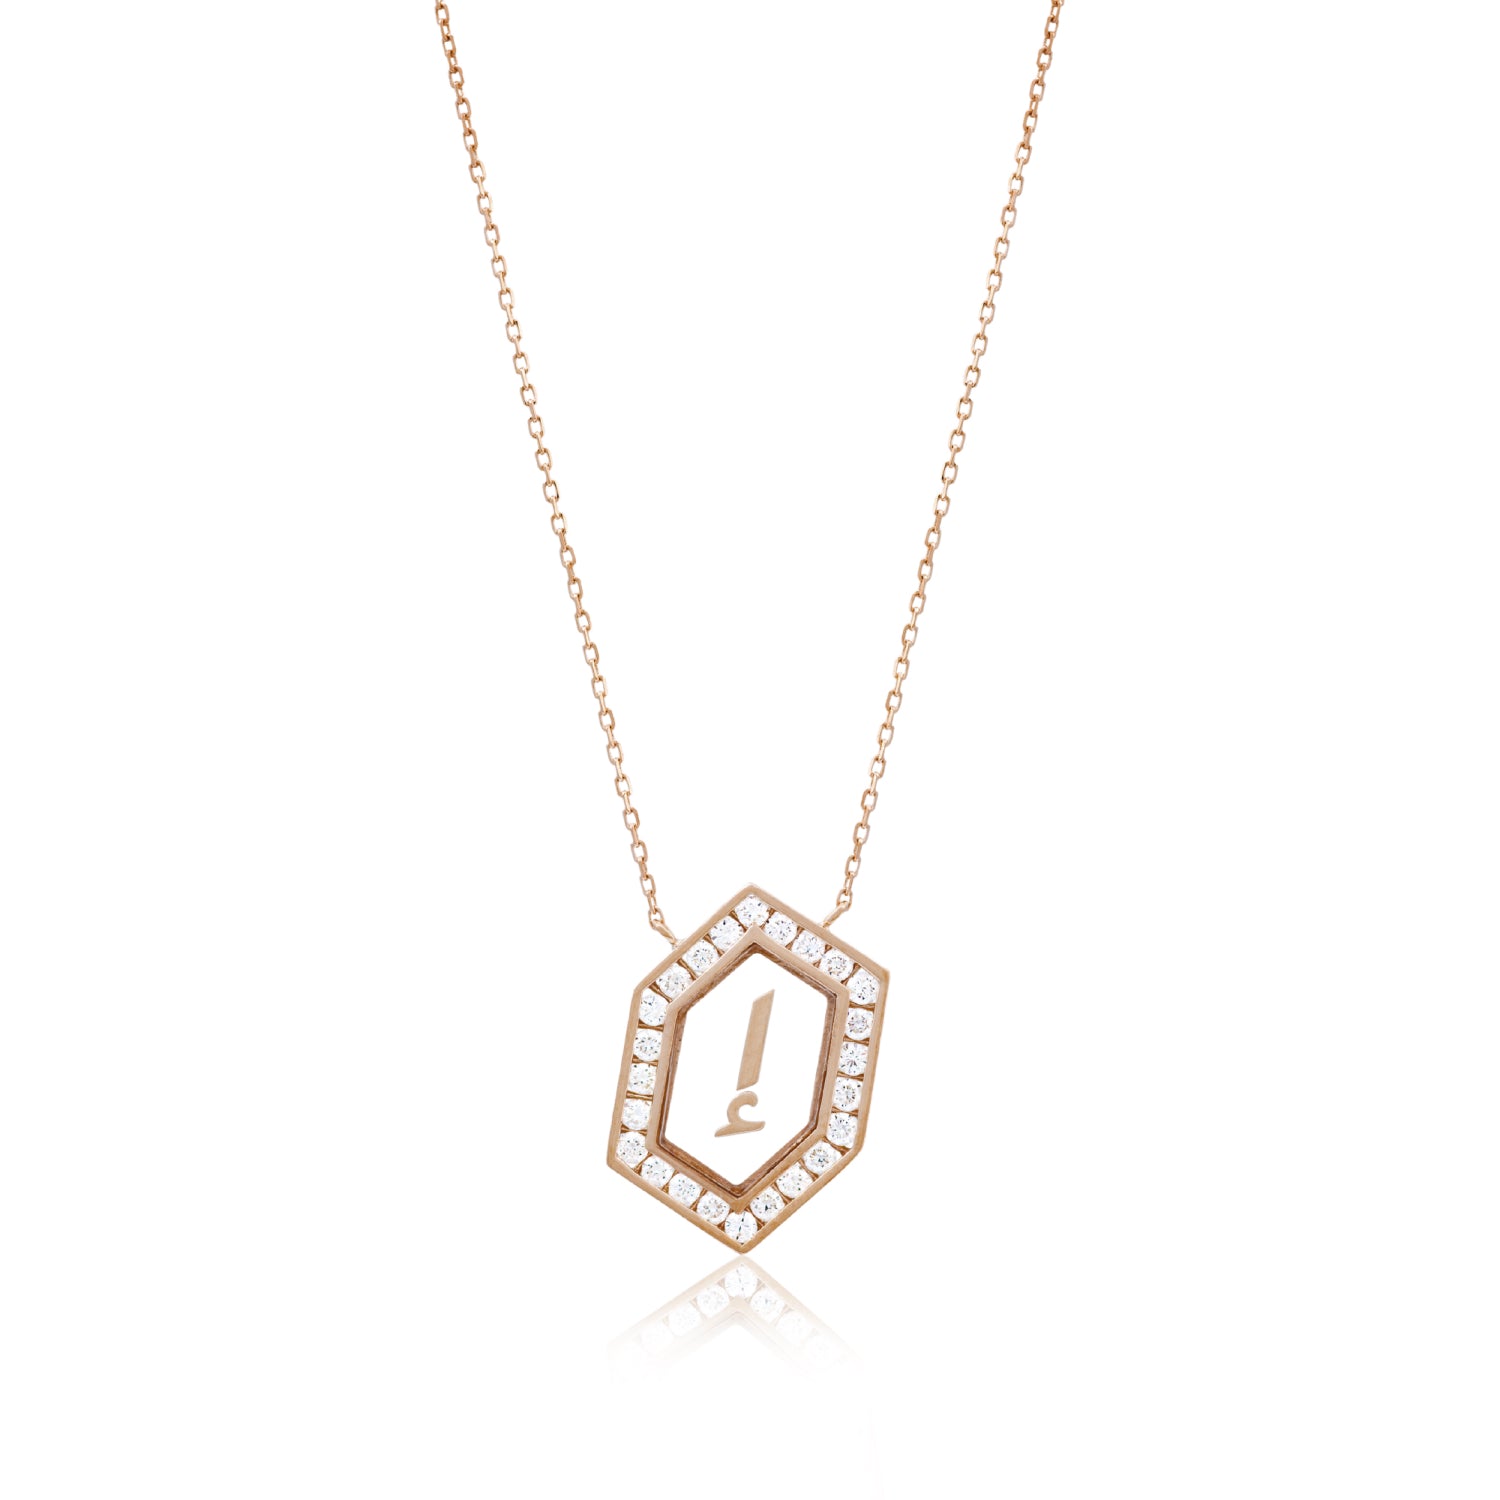 Qamoos 1.0 Letter إ Diamond Necklace in Rose Gold